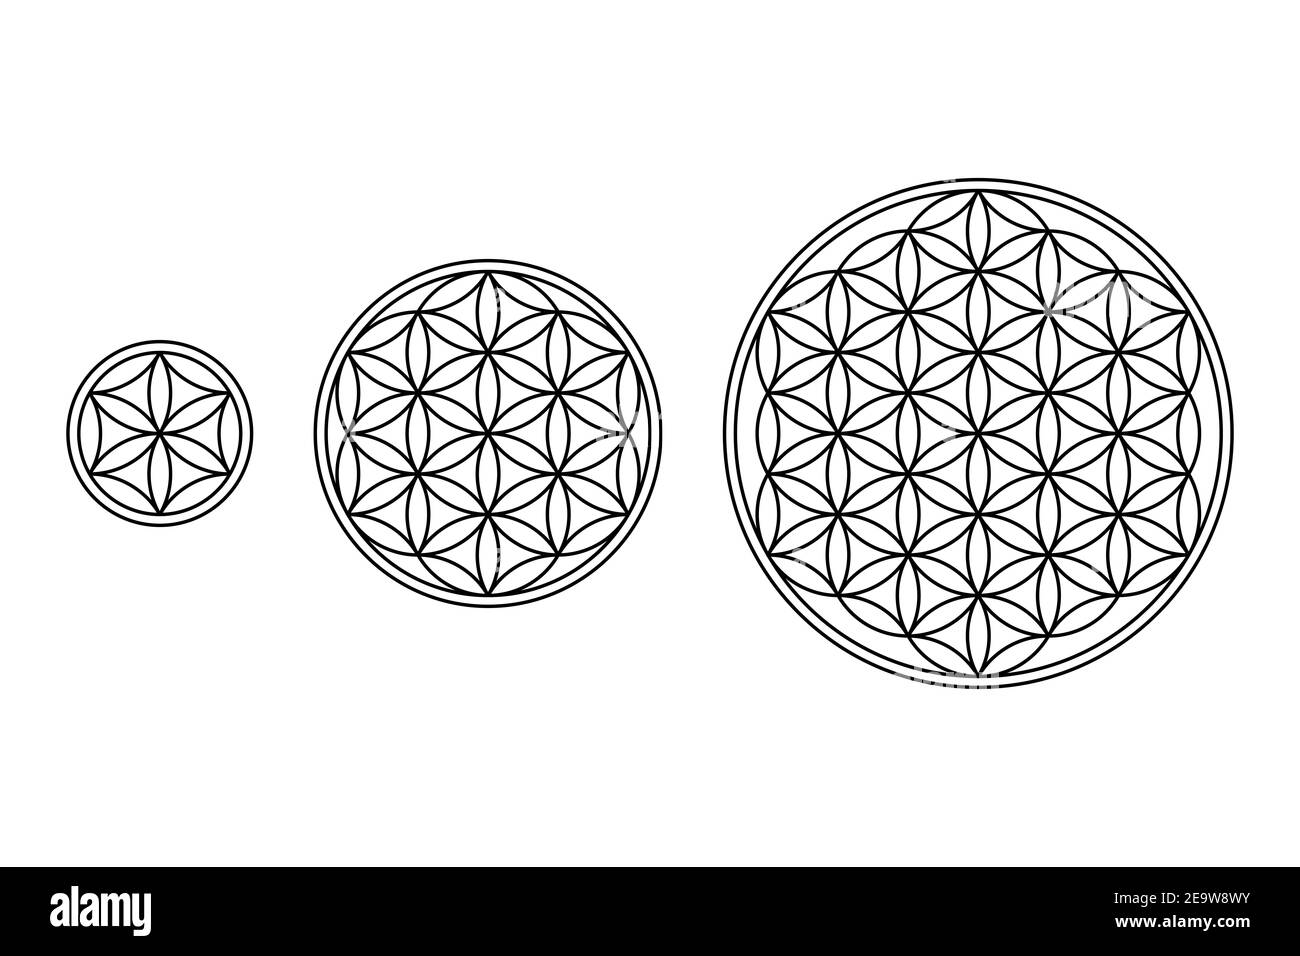 Flower of Life, Core and Seed of Life. Geometric figures and spiritual symbols of Sacred Geometry. Overlapping circles forming flower like patterns. Stock Photo